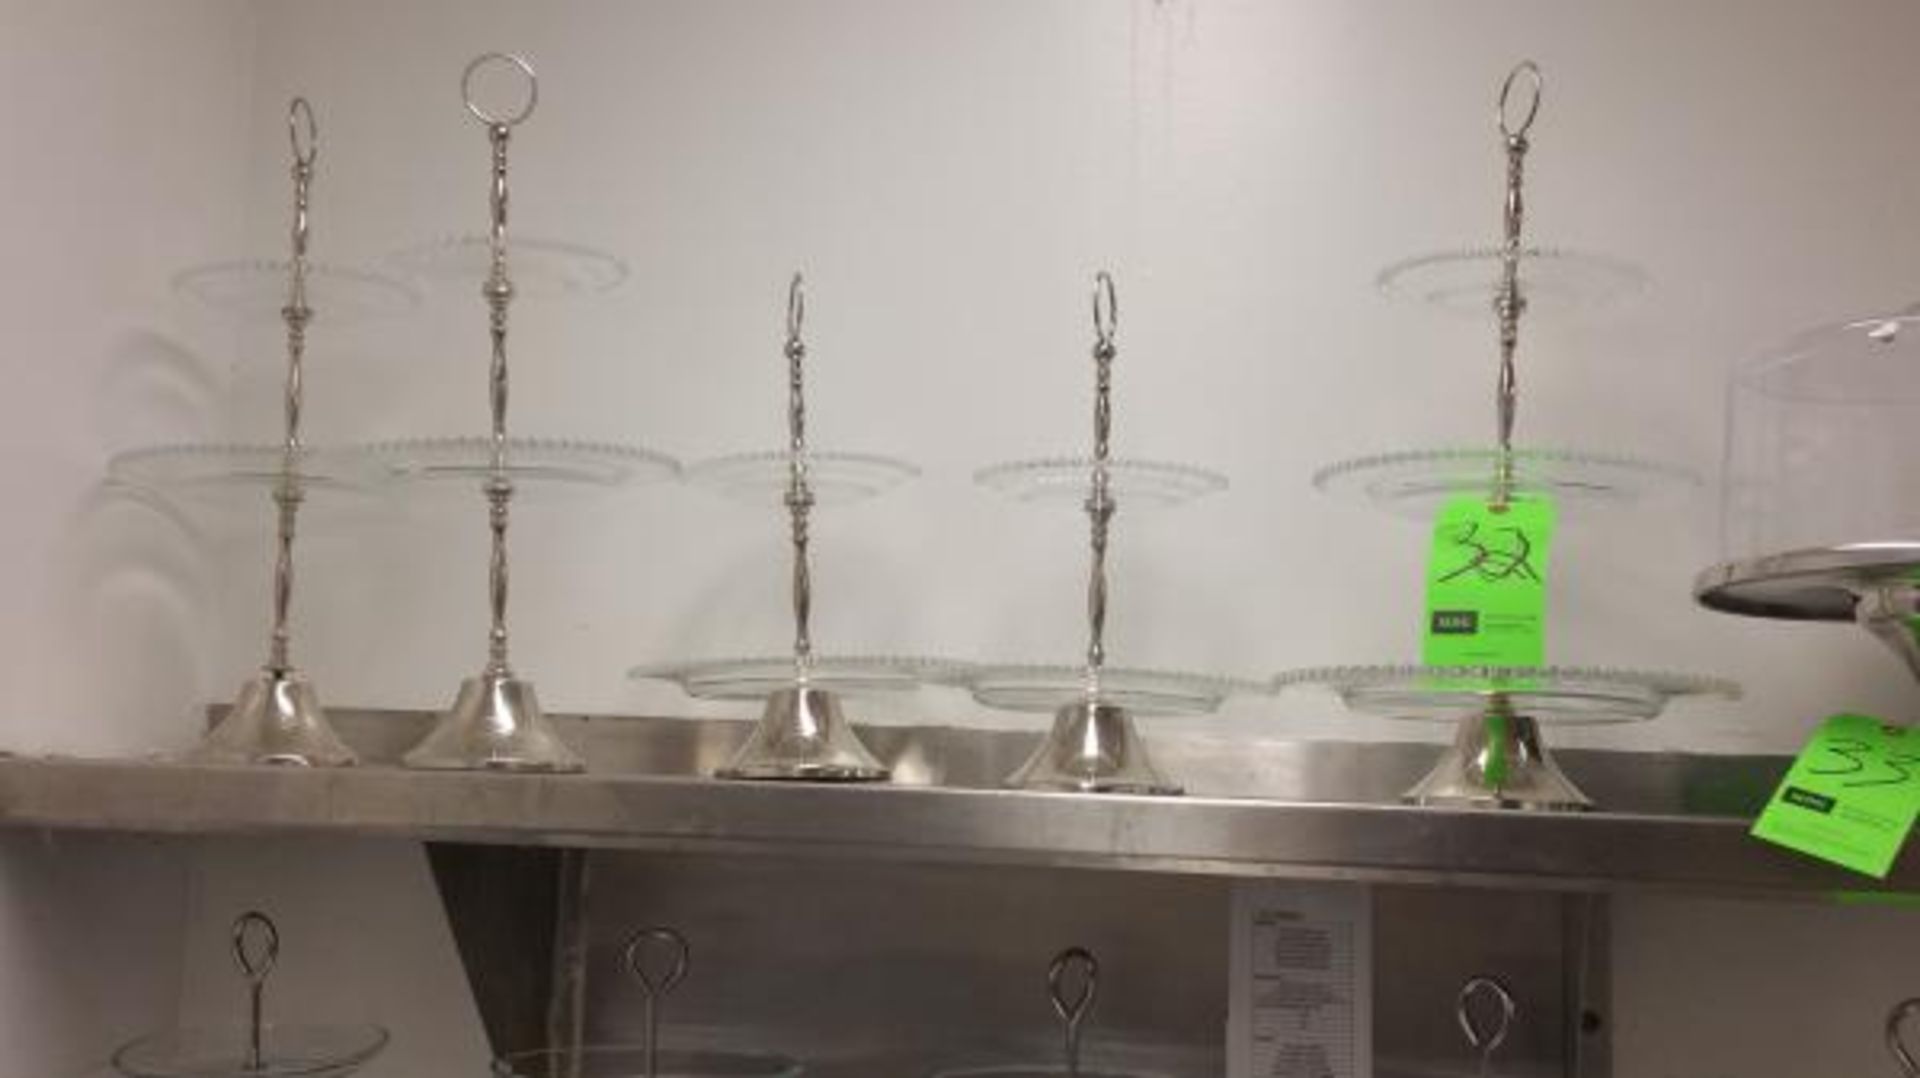 2 and 3 Tier Glass and Stainless Pastry Displays Rigging Cost: $10 - Image 2 of 3